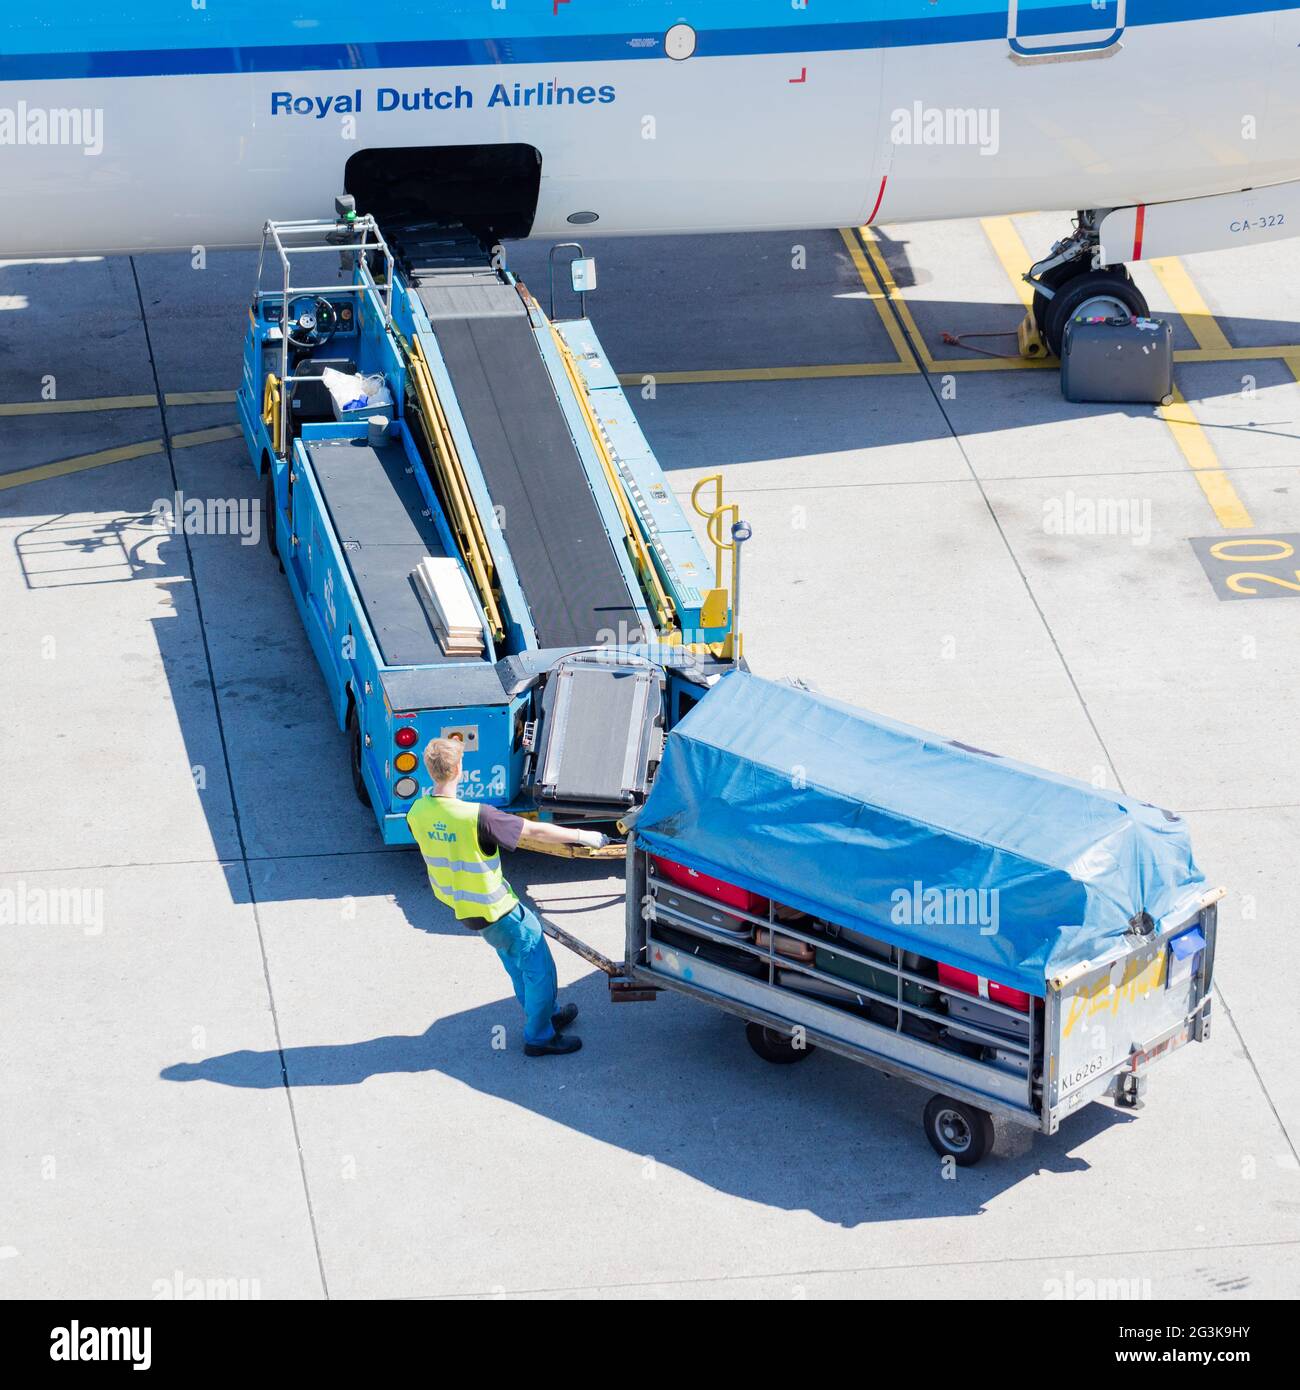 AMSTERDAM, NETHERLANDS - AUGUST 17, 2016: Loading luggage in airplane at Amsterdam Schiphol airport, Netherlands on August 17, 2 Stock Photo